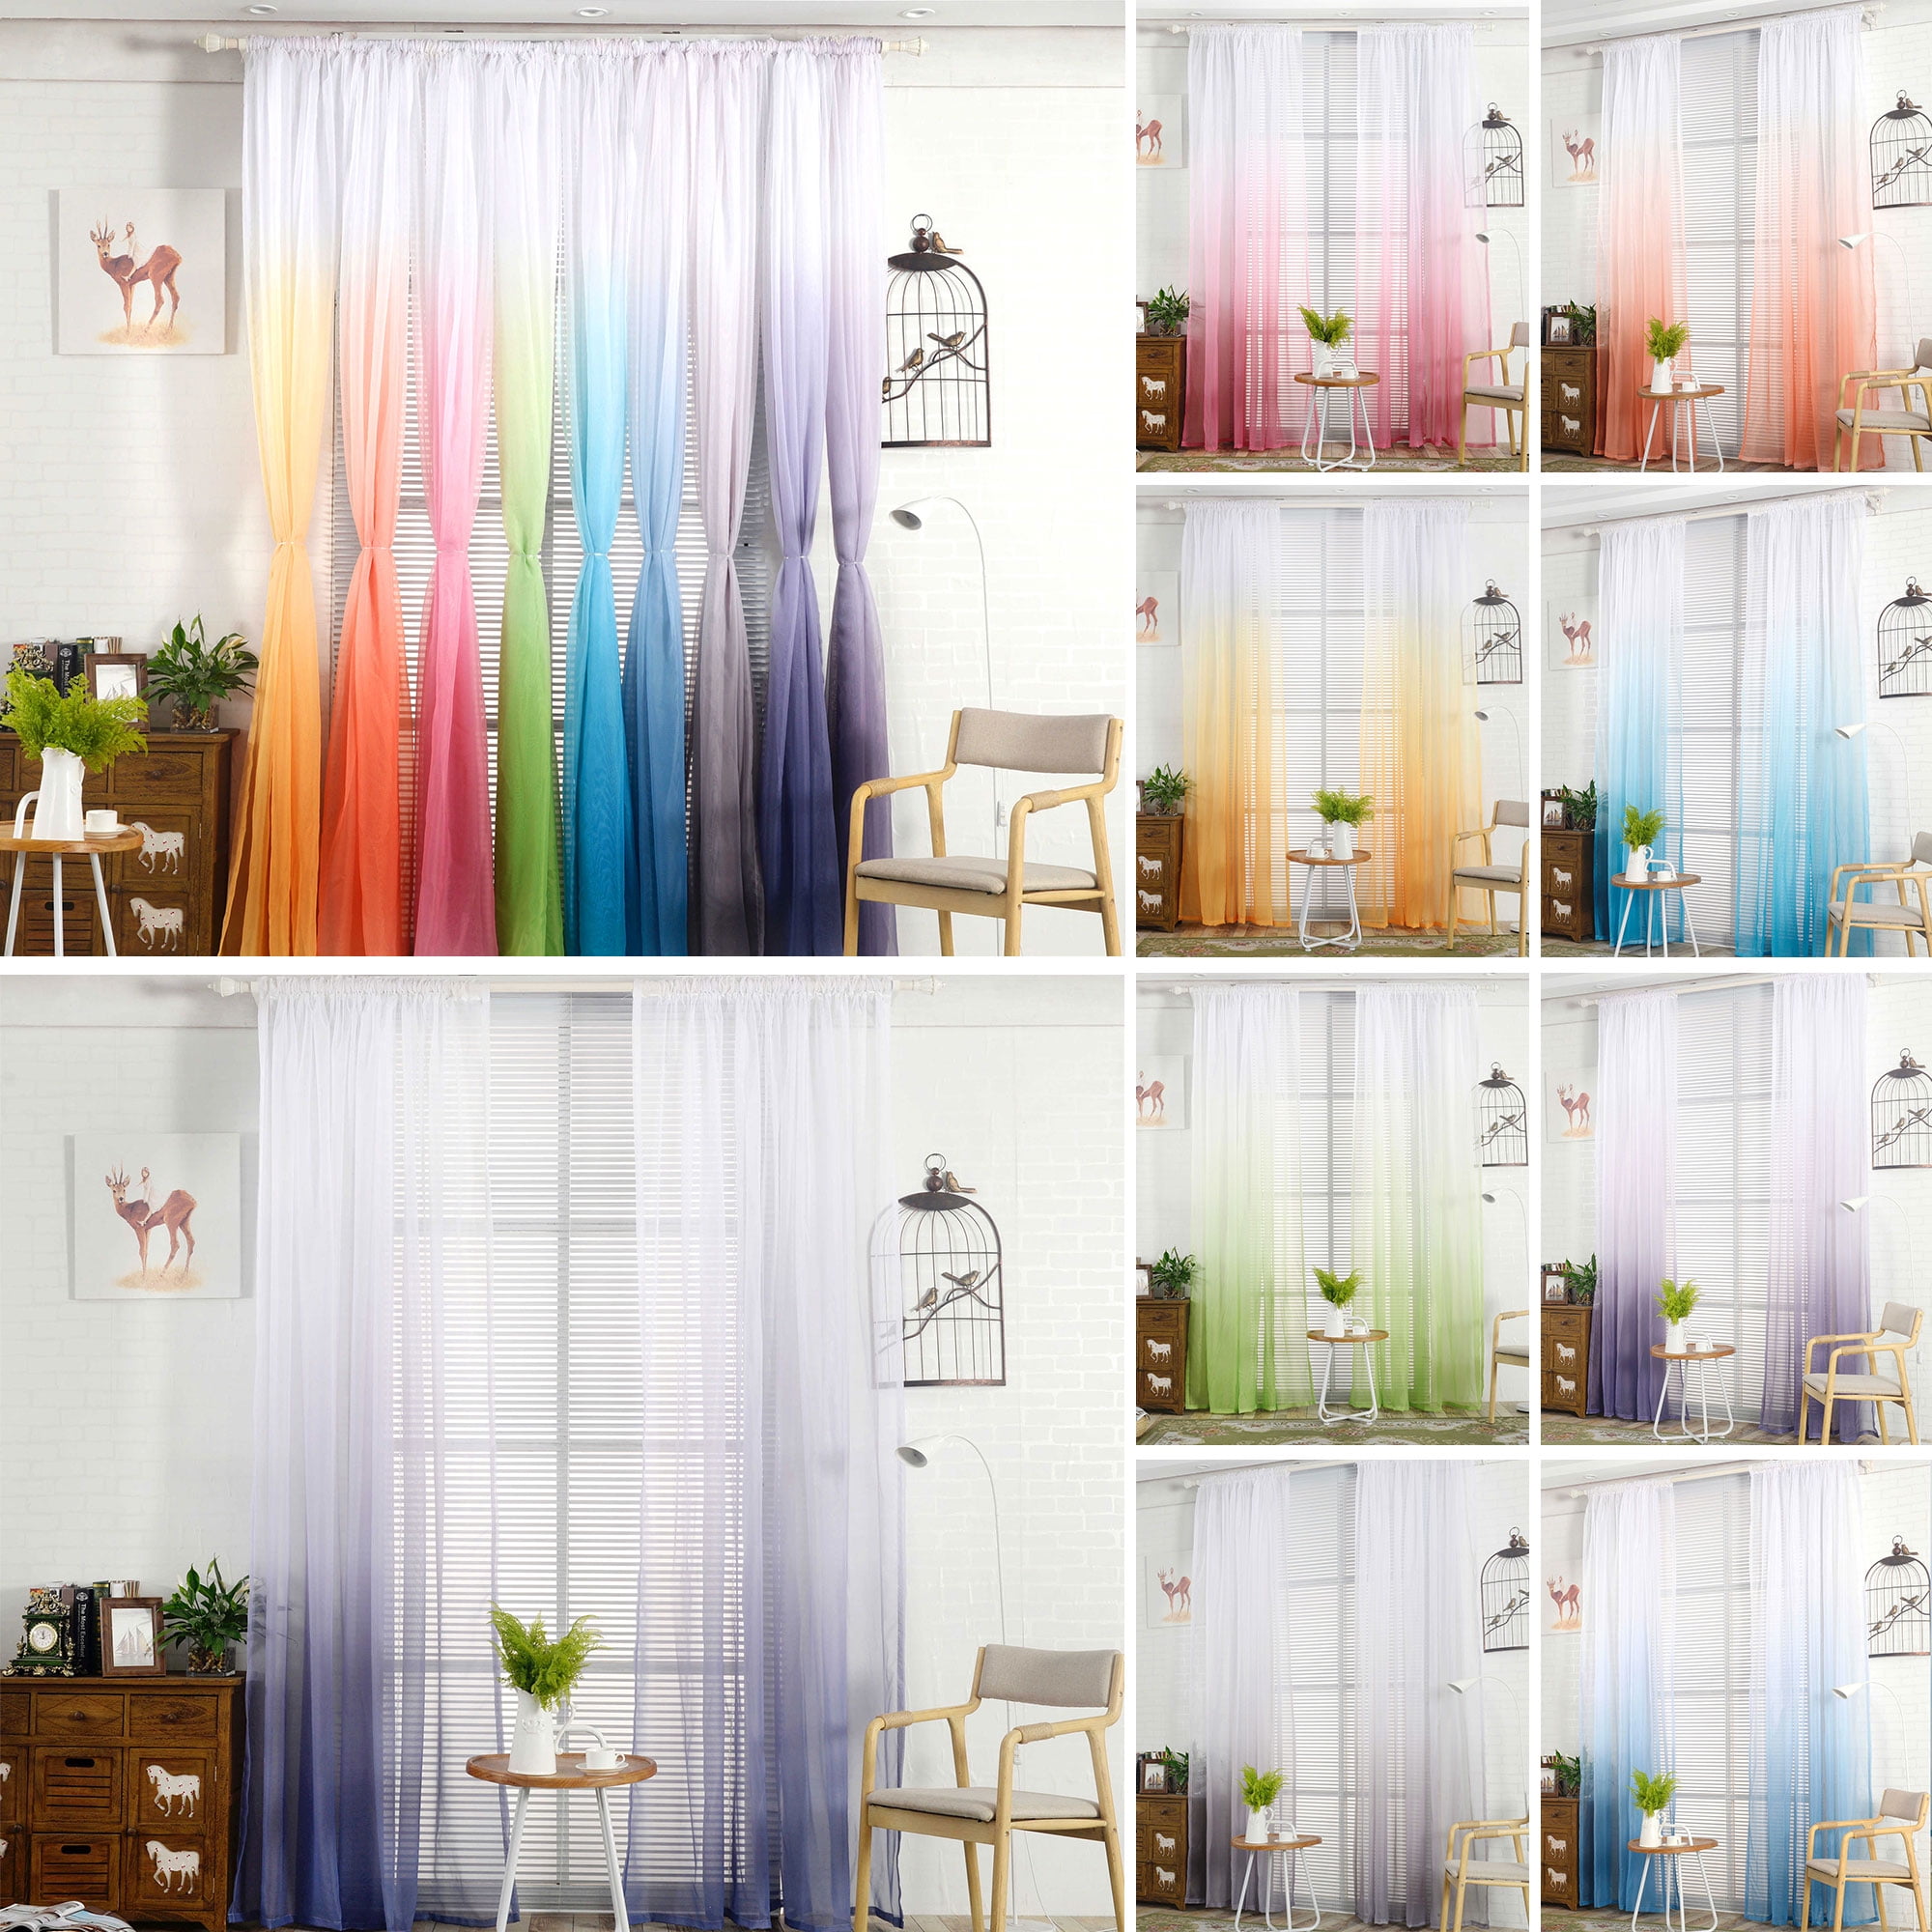 100x200cm Gradient Color Window Tulle Voile Curtain Panel Sheer,Rod Pocket Style 